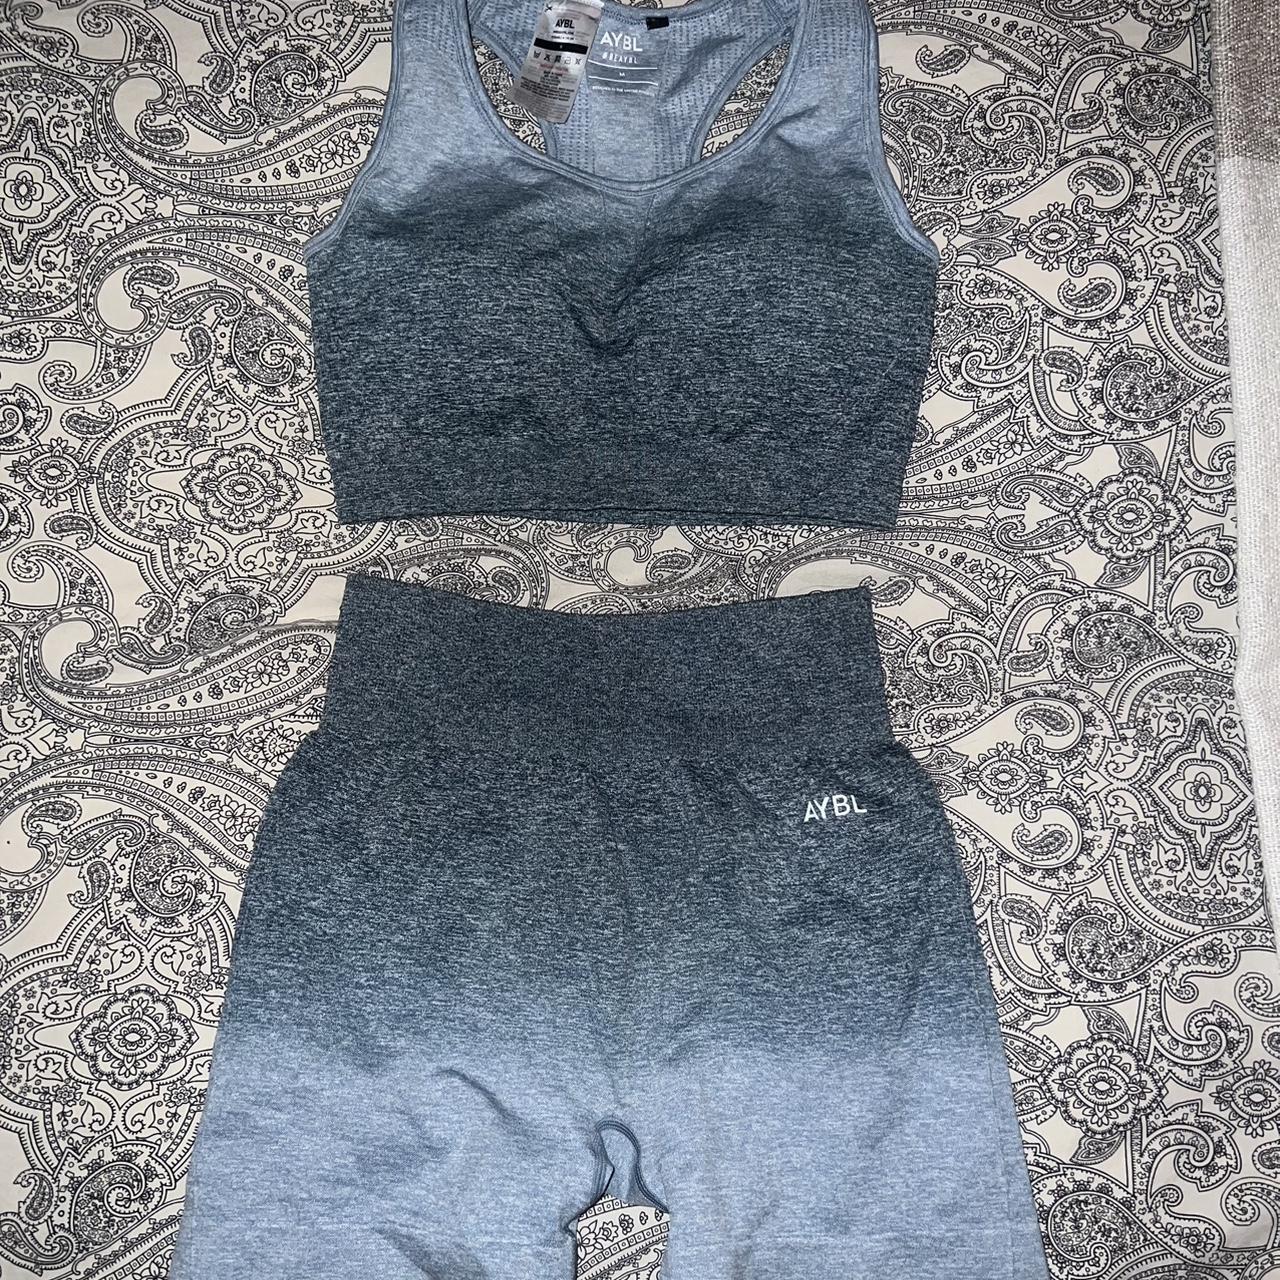 Aybl gym set! Sizing in photos been worn once - Depop